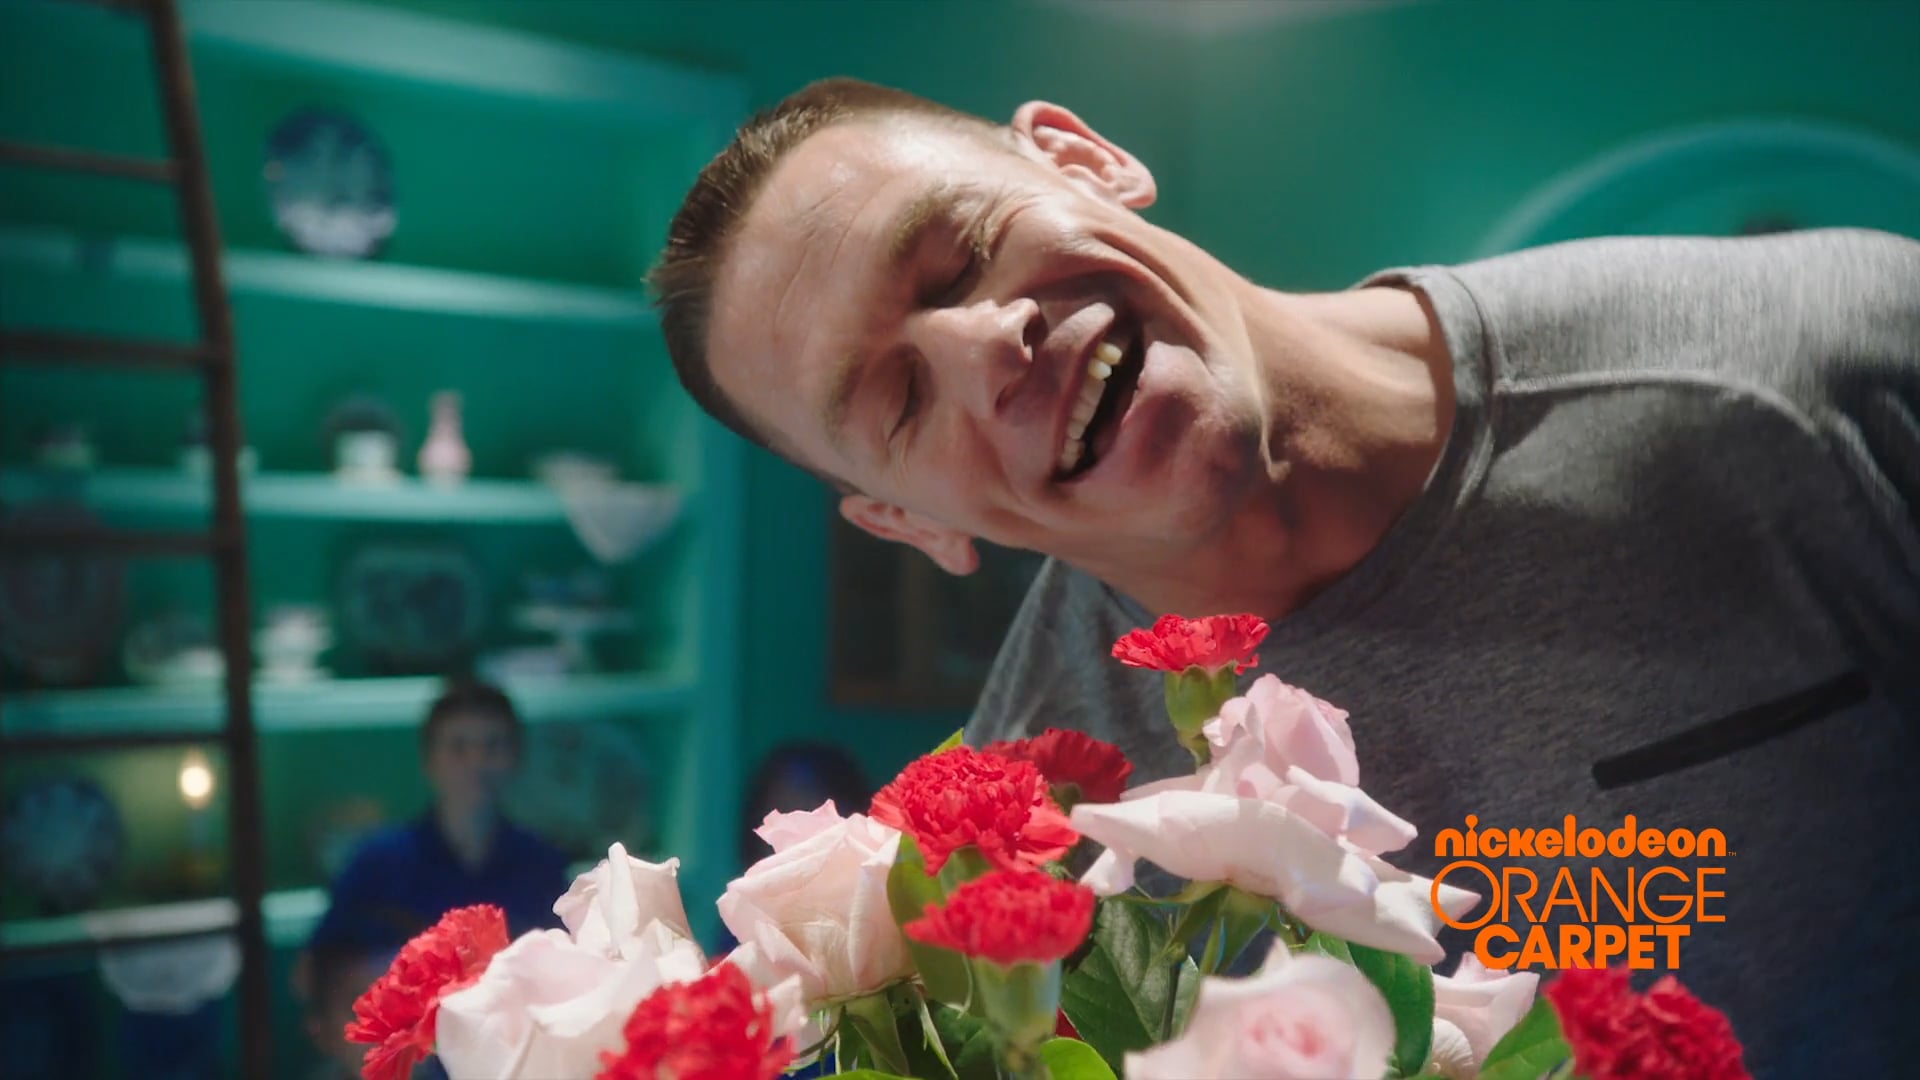 Ferdinand Special Content Piece for Nickelodeon with John Cena